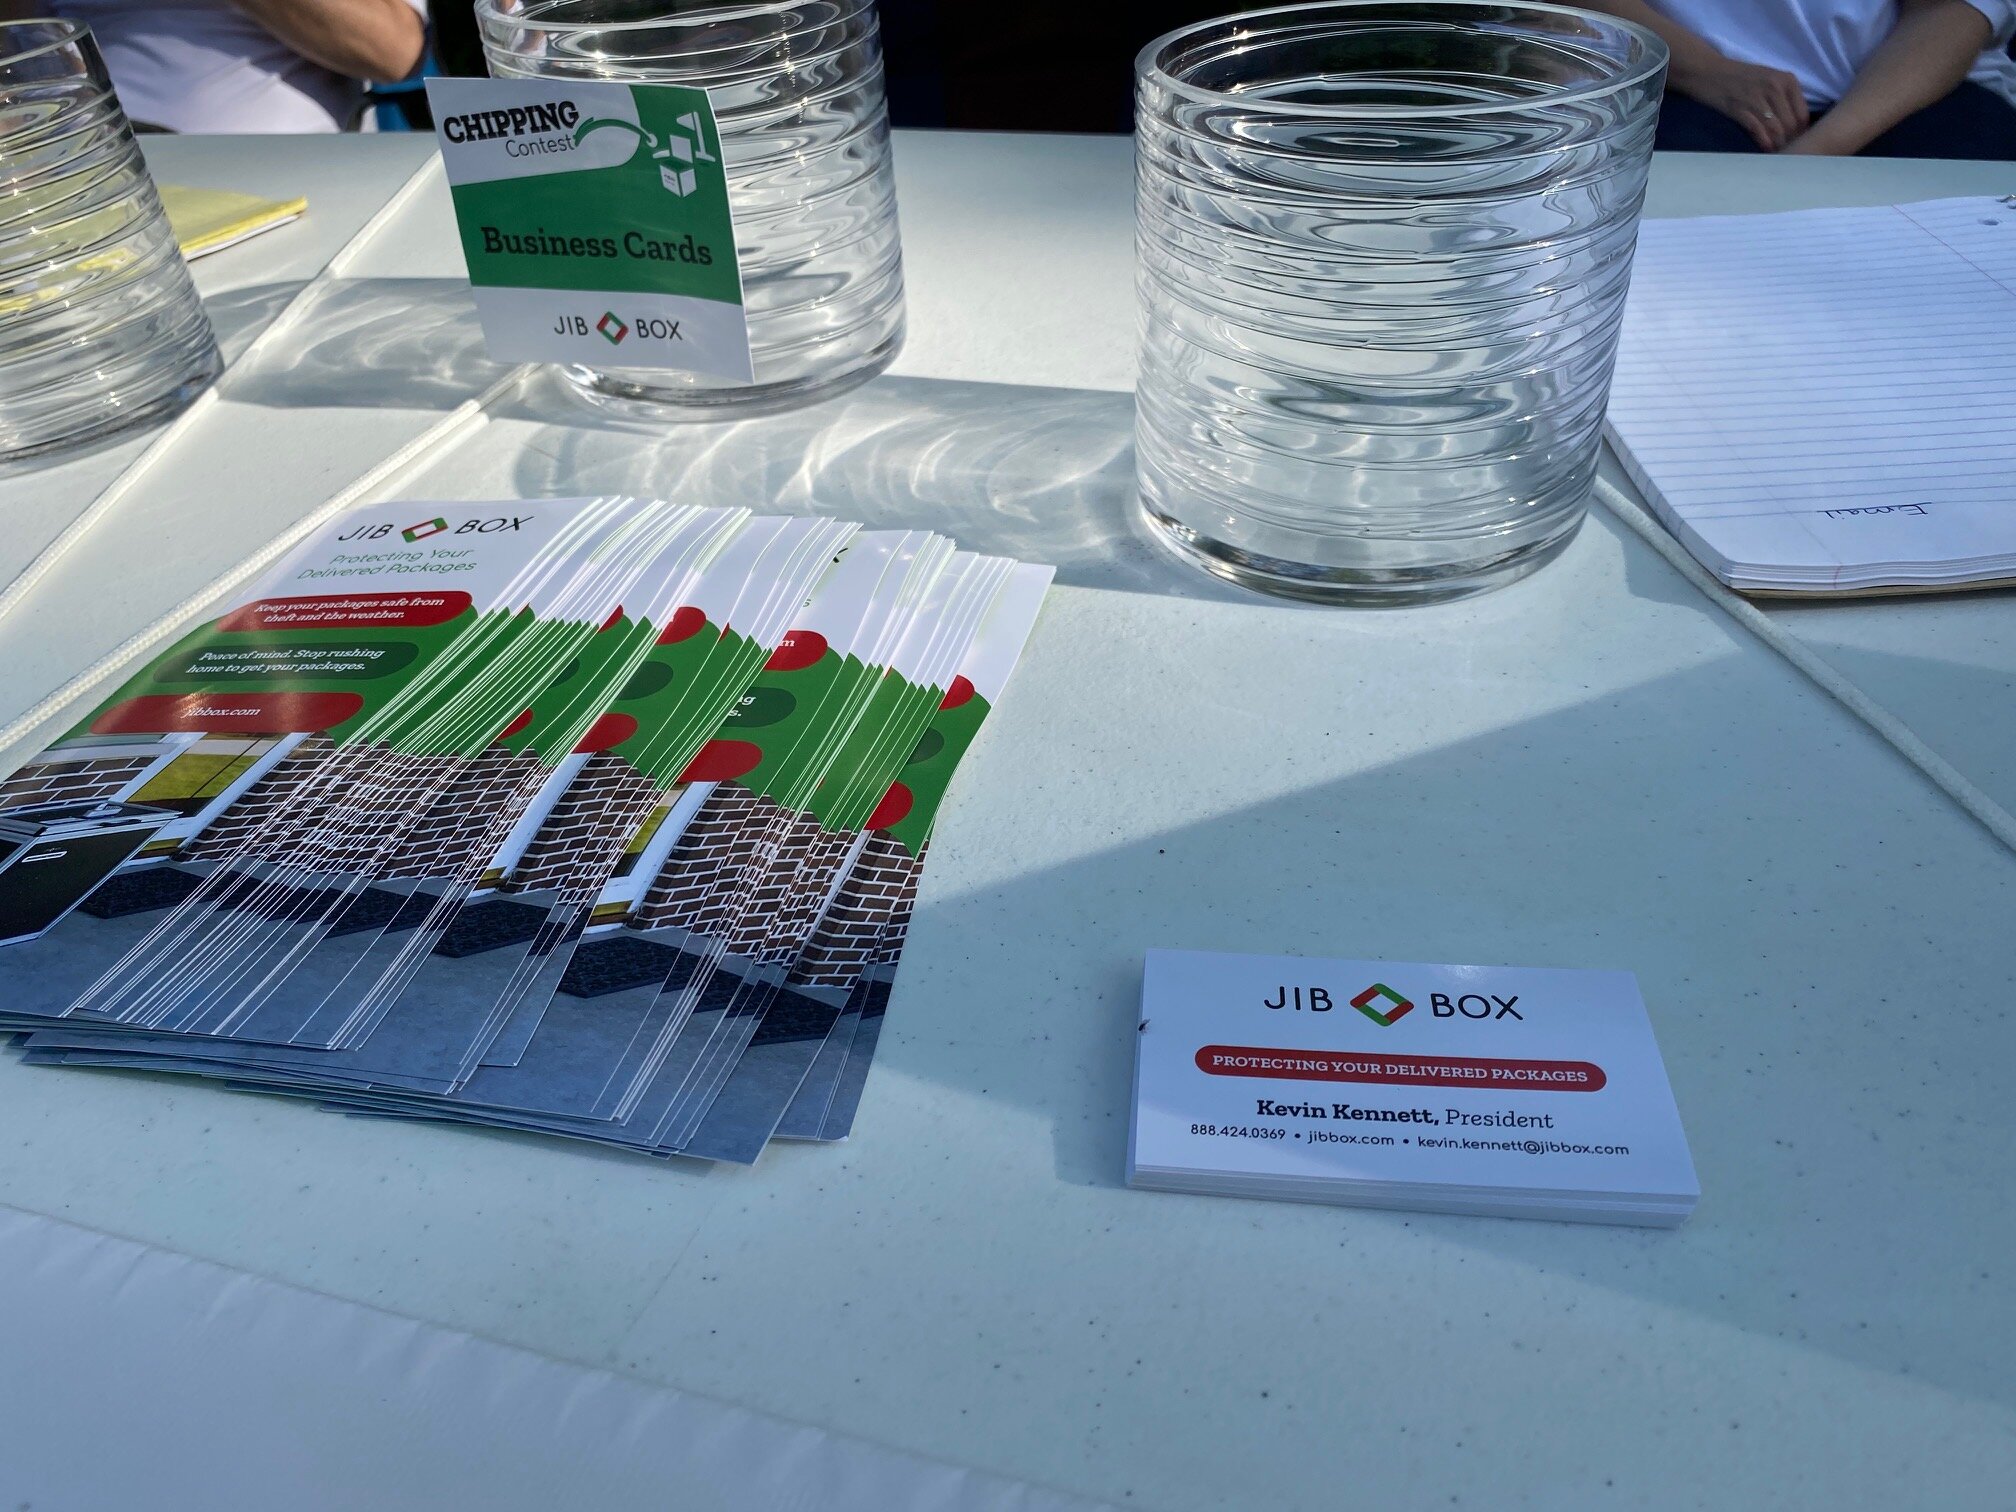 GLBMA Golf Outing 2021 - Business Cards and Rack Cards.jpg